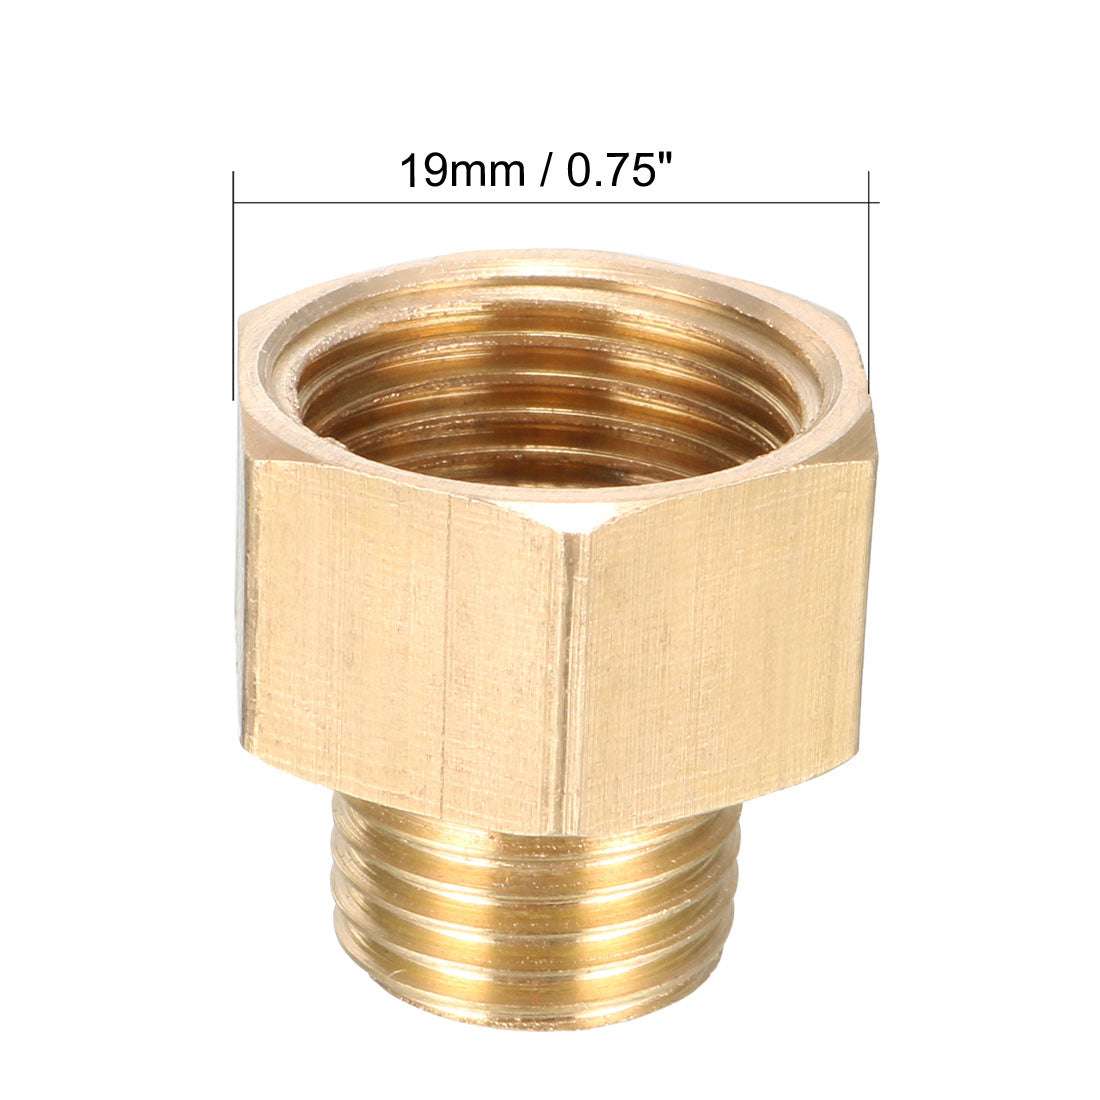 uxcell Uxcell Brass Threaded Pipe Fitting G1/4 Male x G3/8 Female Coupling 2pcs